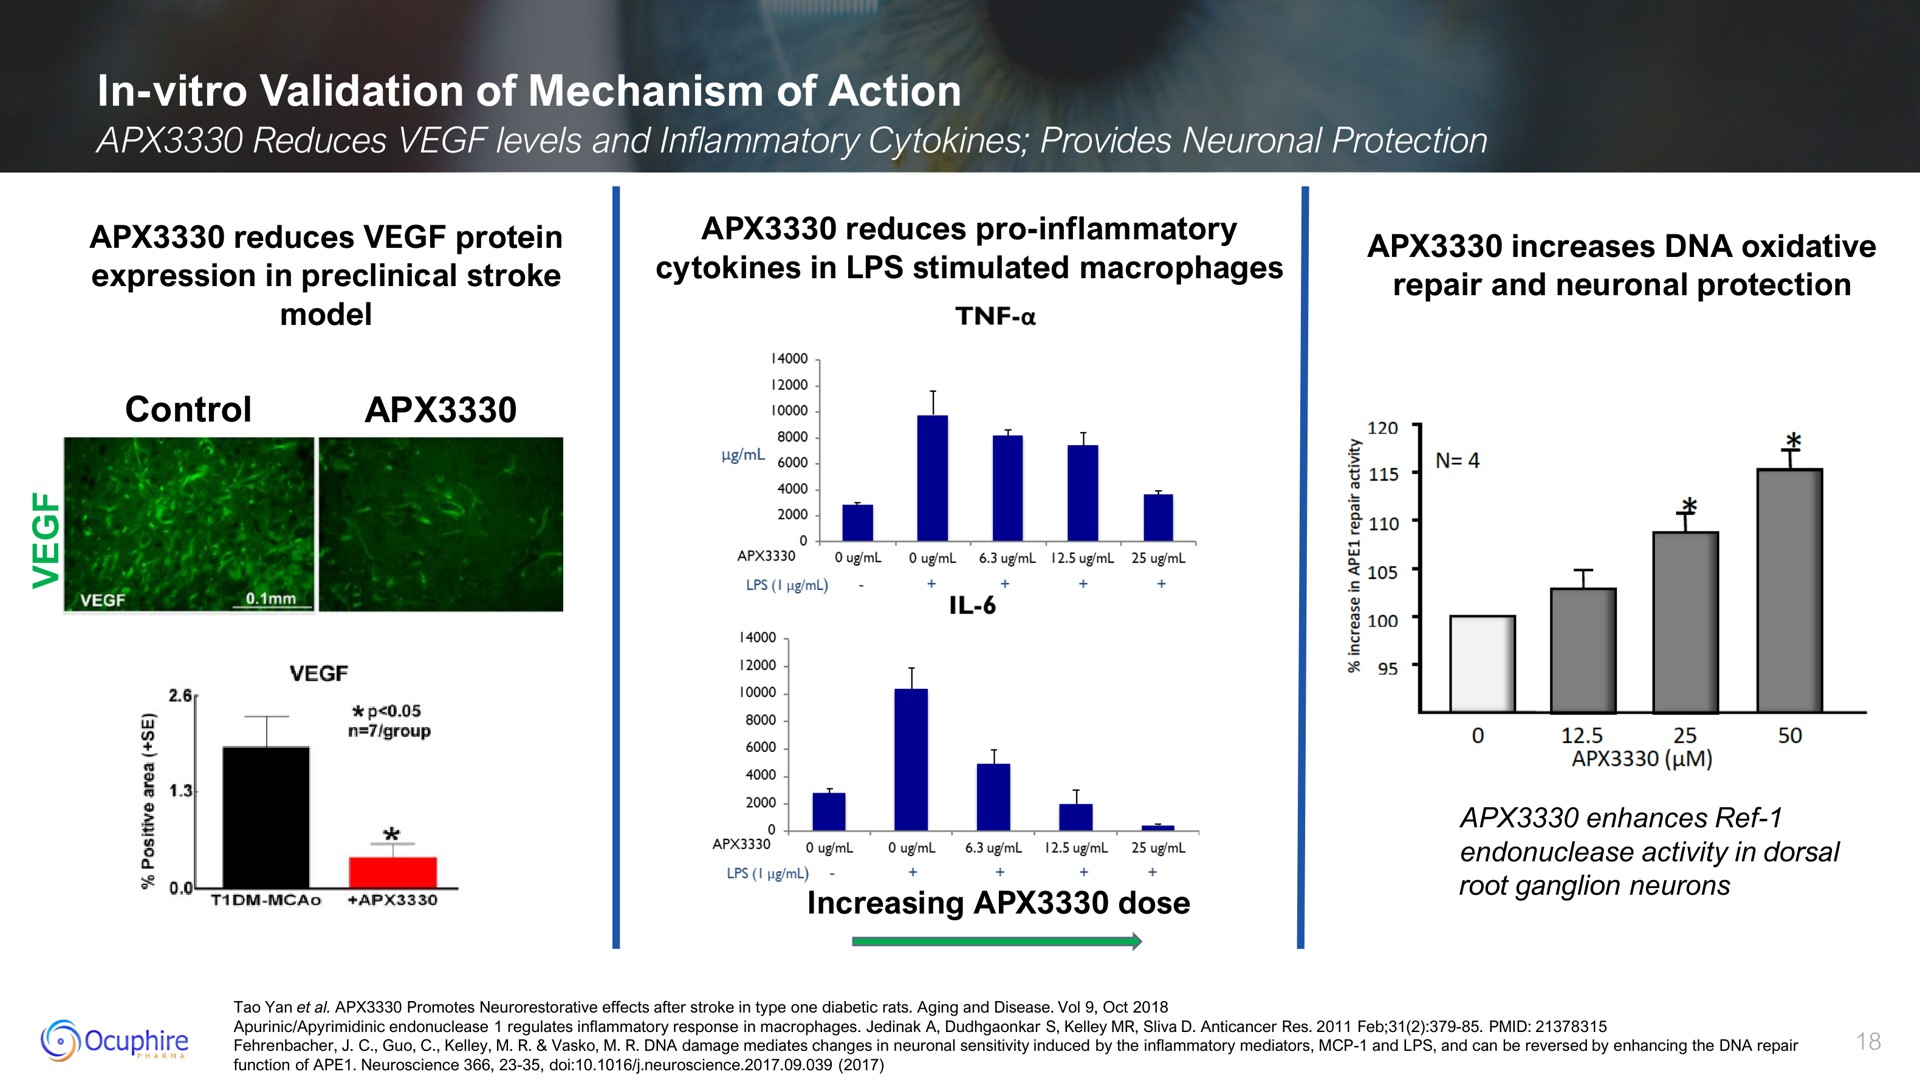 in validation of mechanism of action reduces protein reduces pro inflammatory increases oxidative increasing dose gang | Ocuphire Pharma